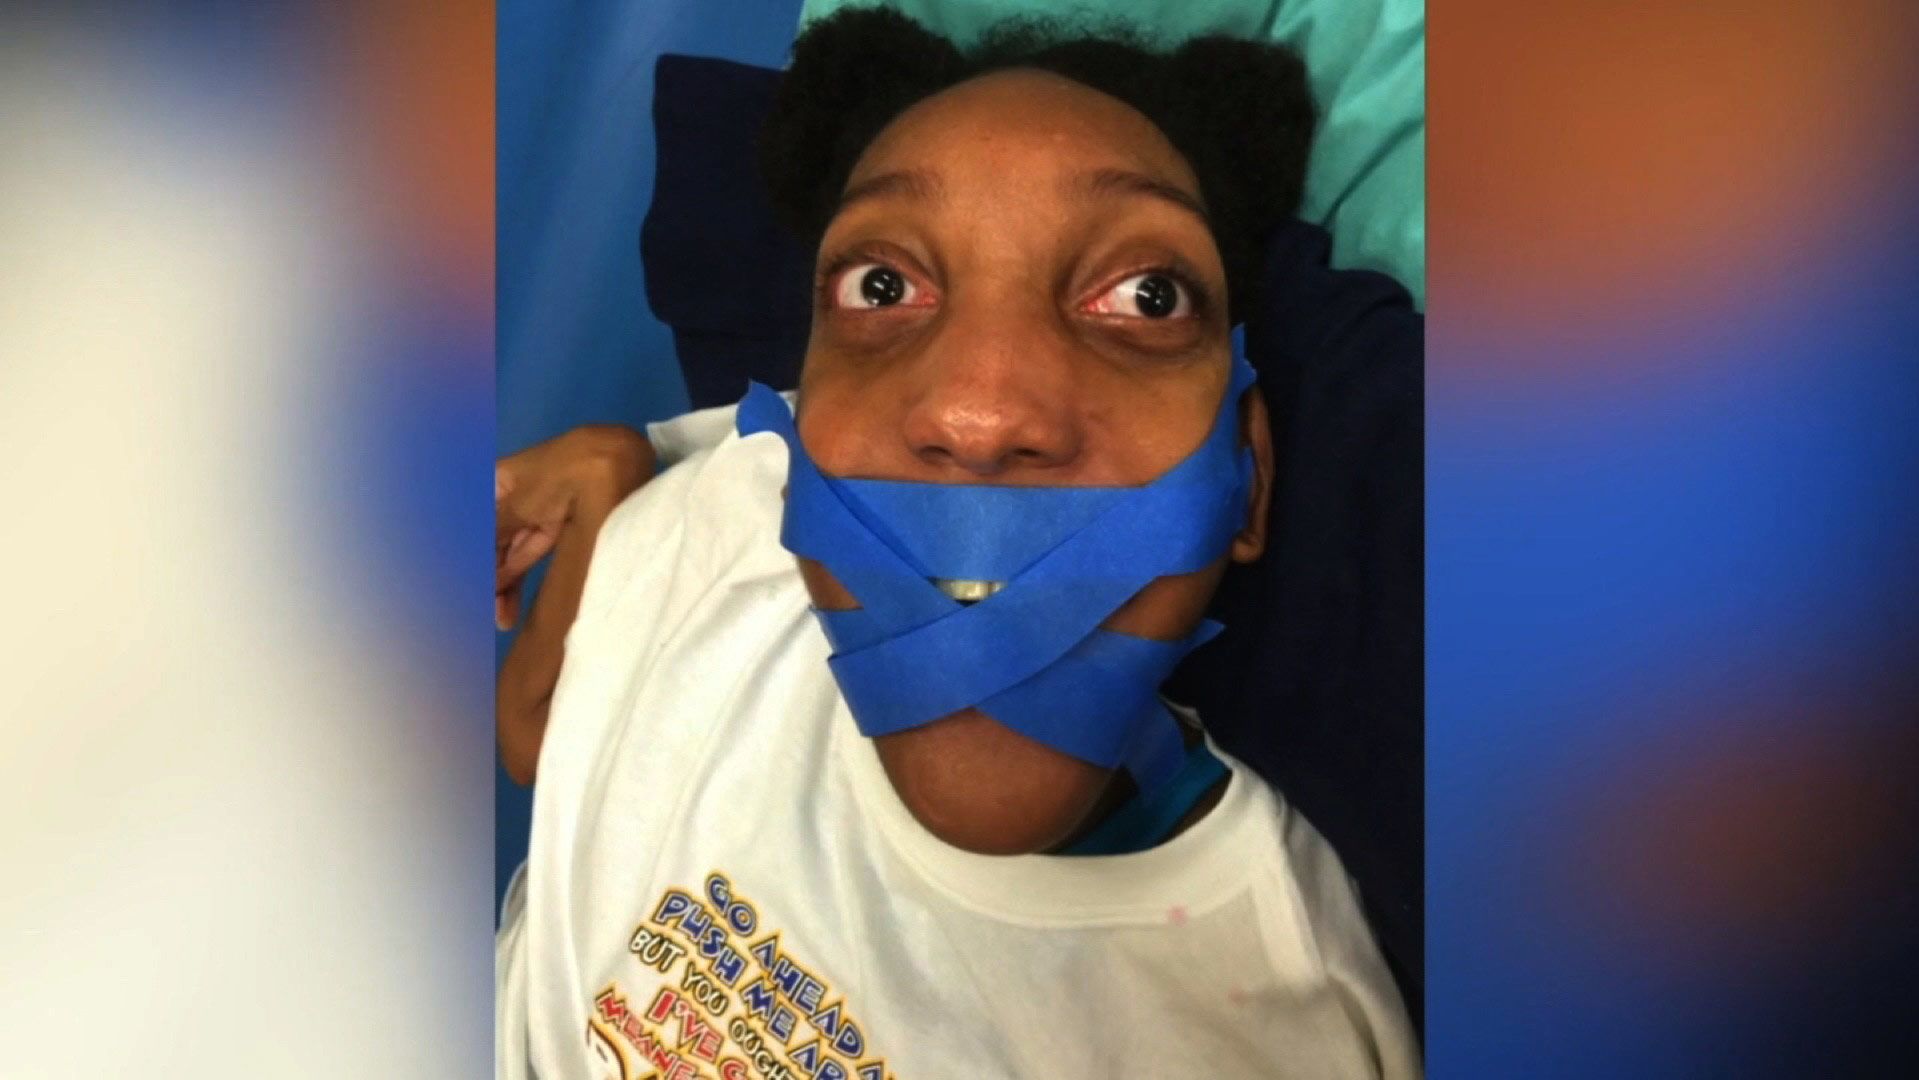 04 teacher tapes girl with cerebral palsy's mouth shut